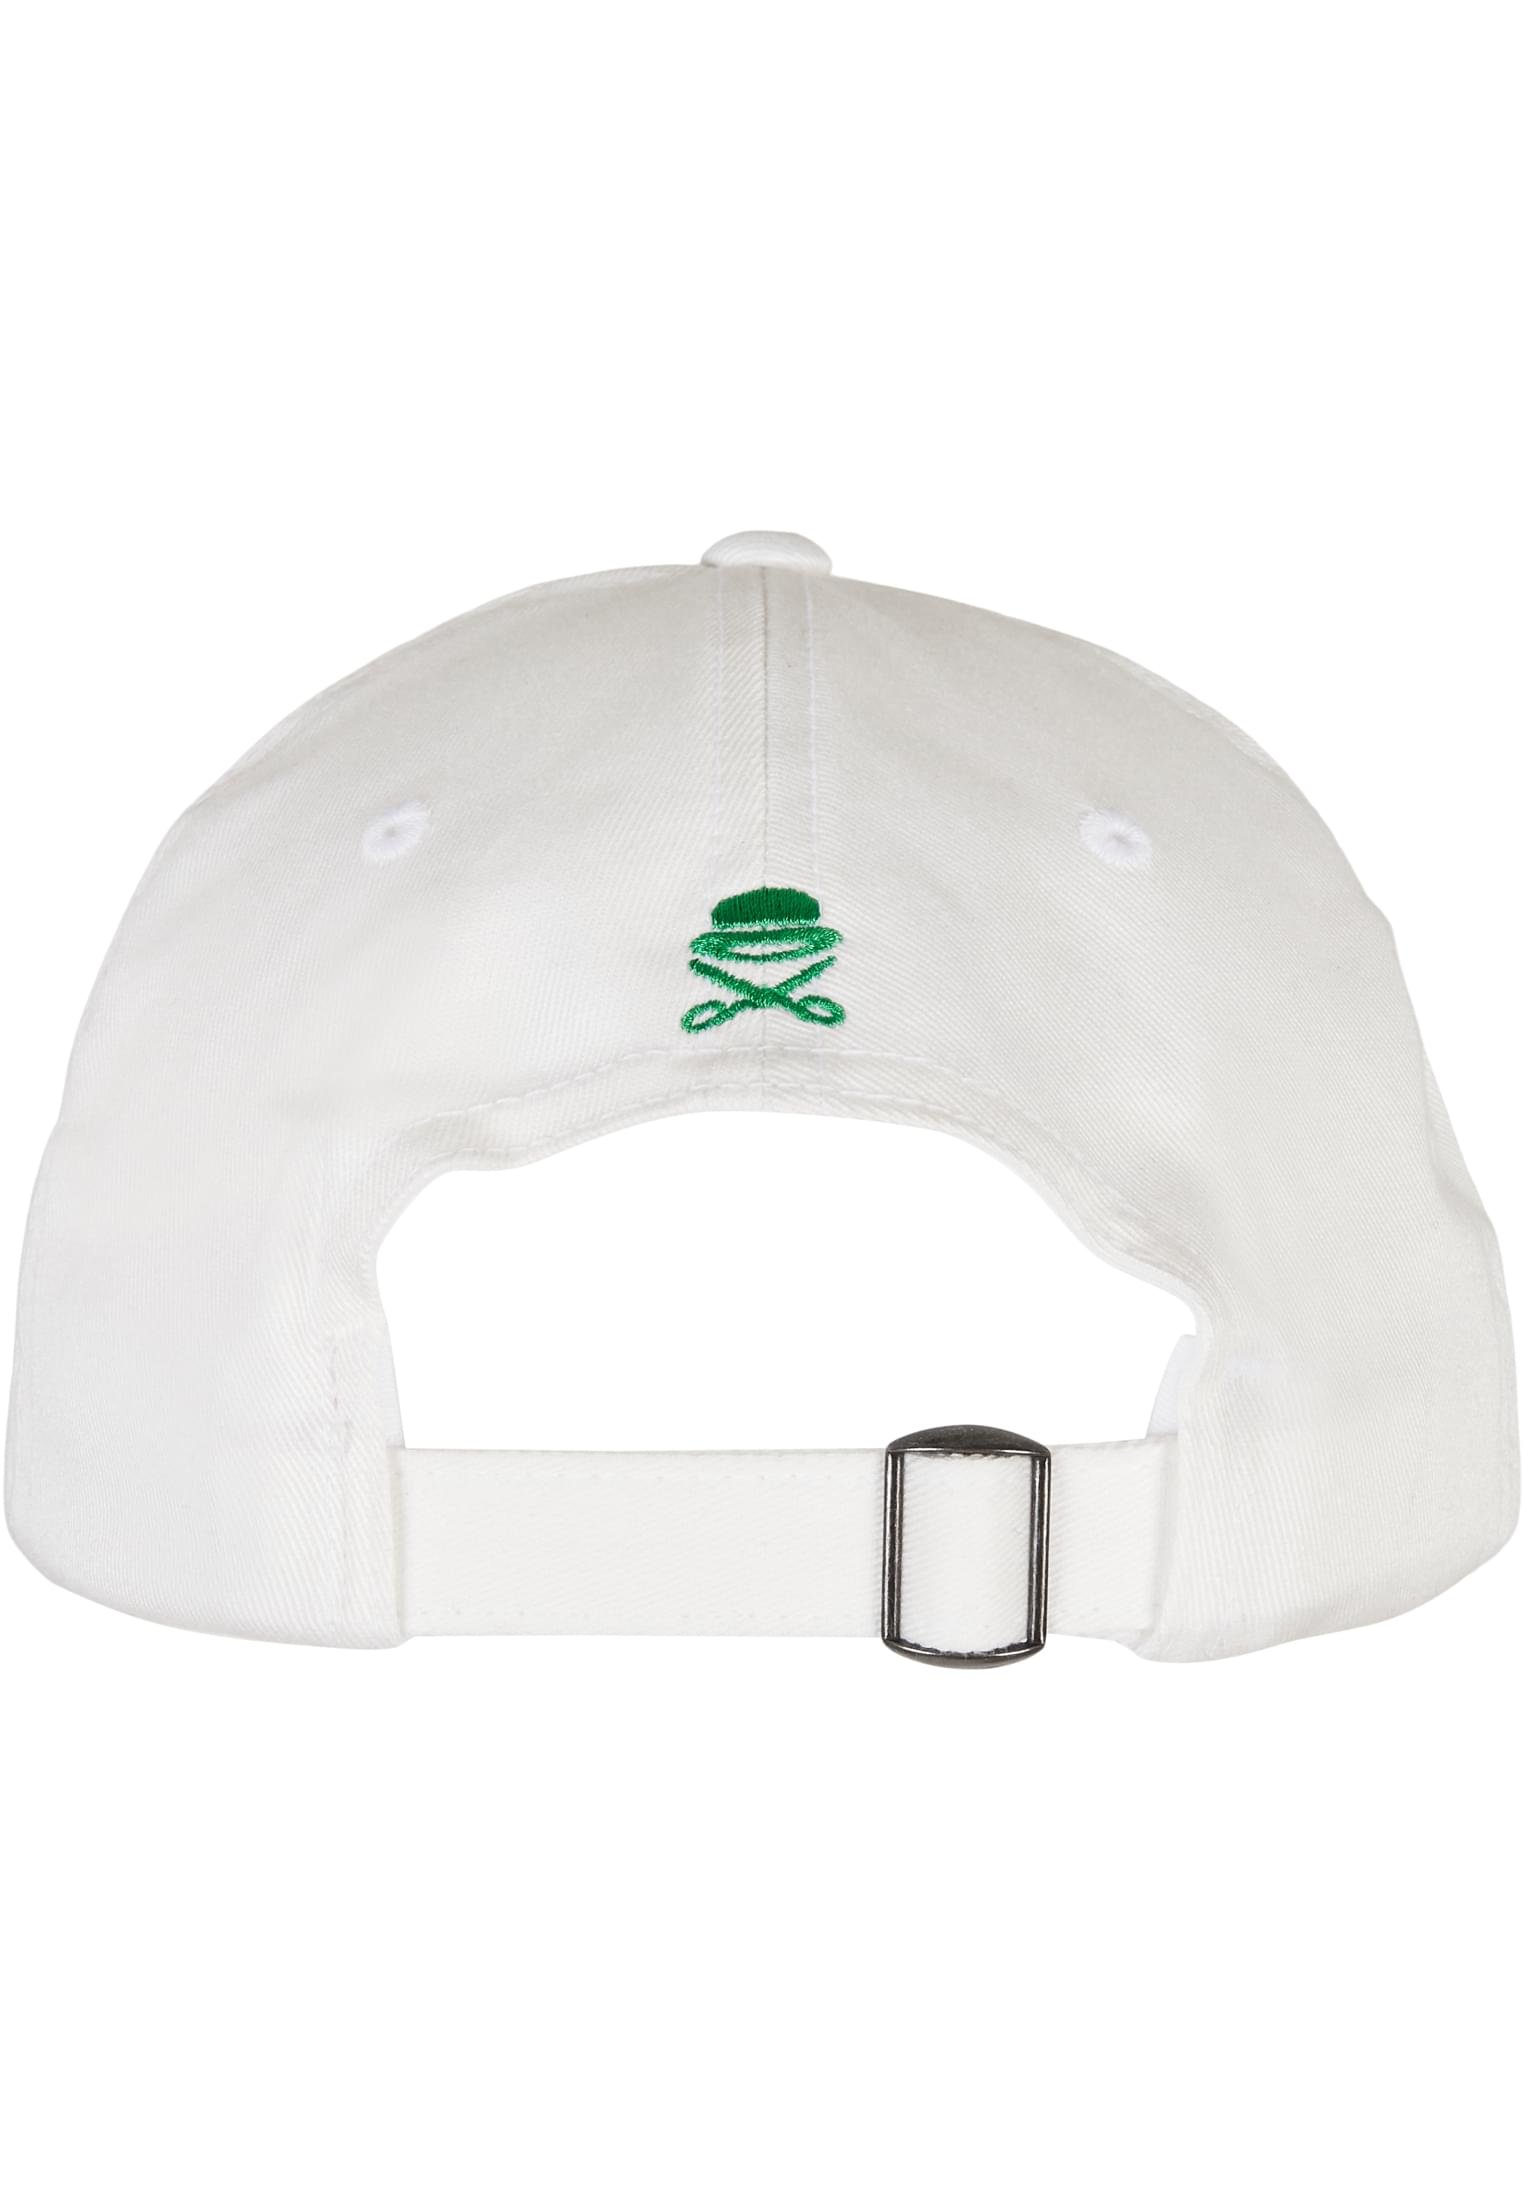 C&S Local Planet Curved Cap white/mc one size